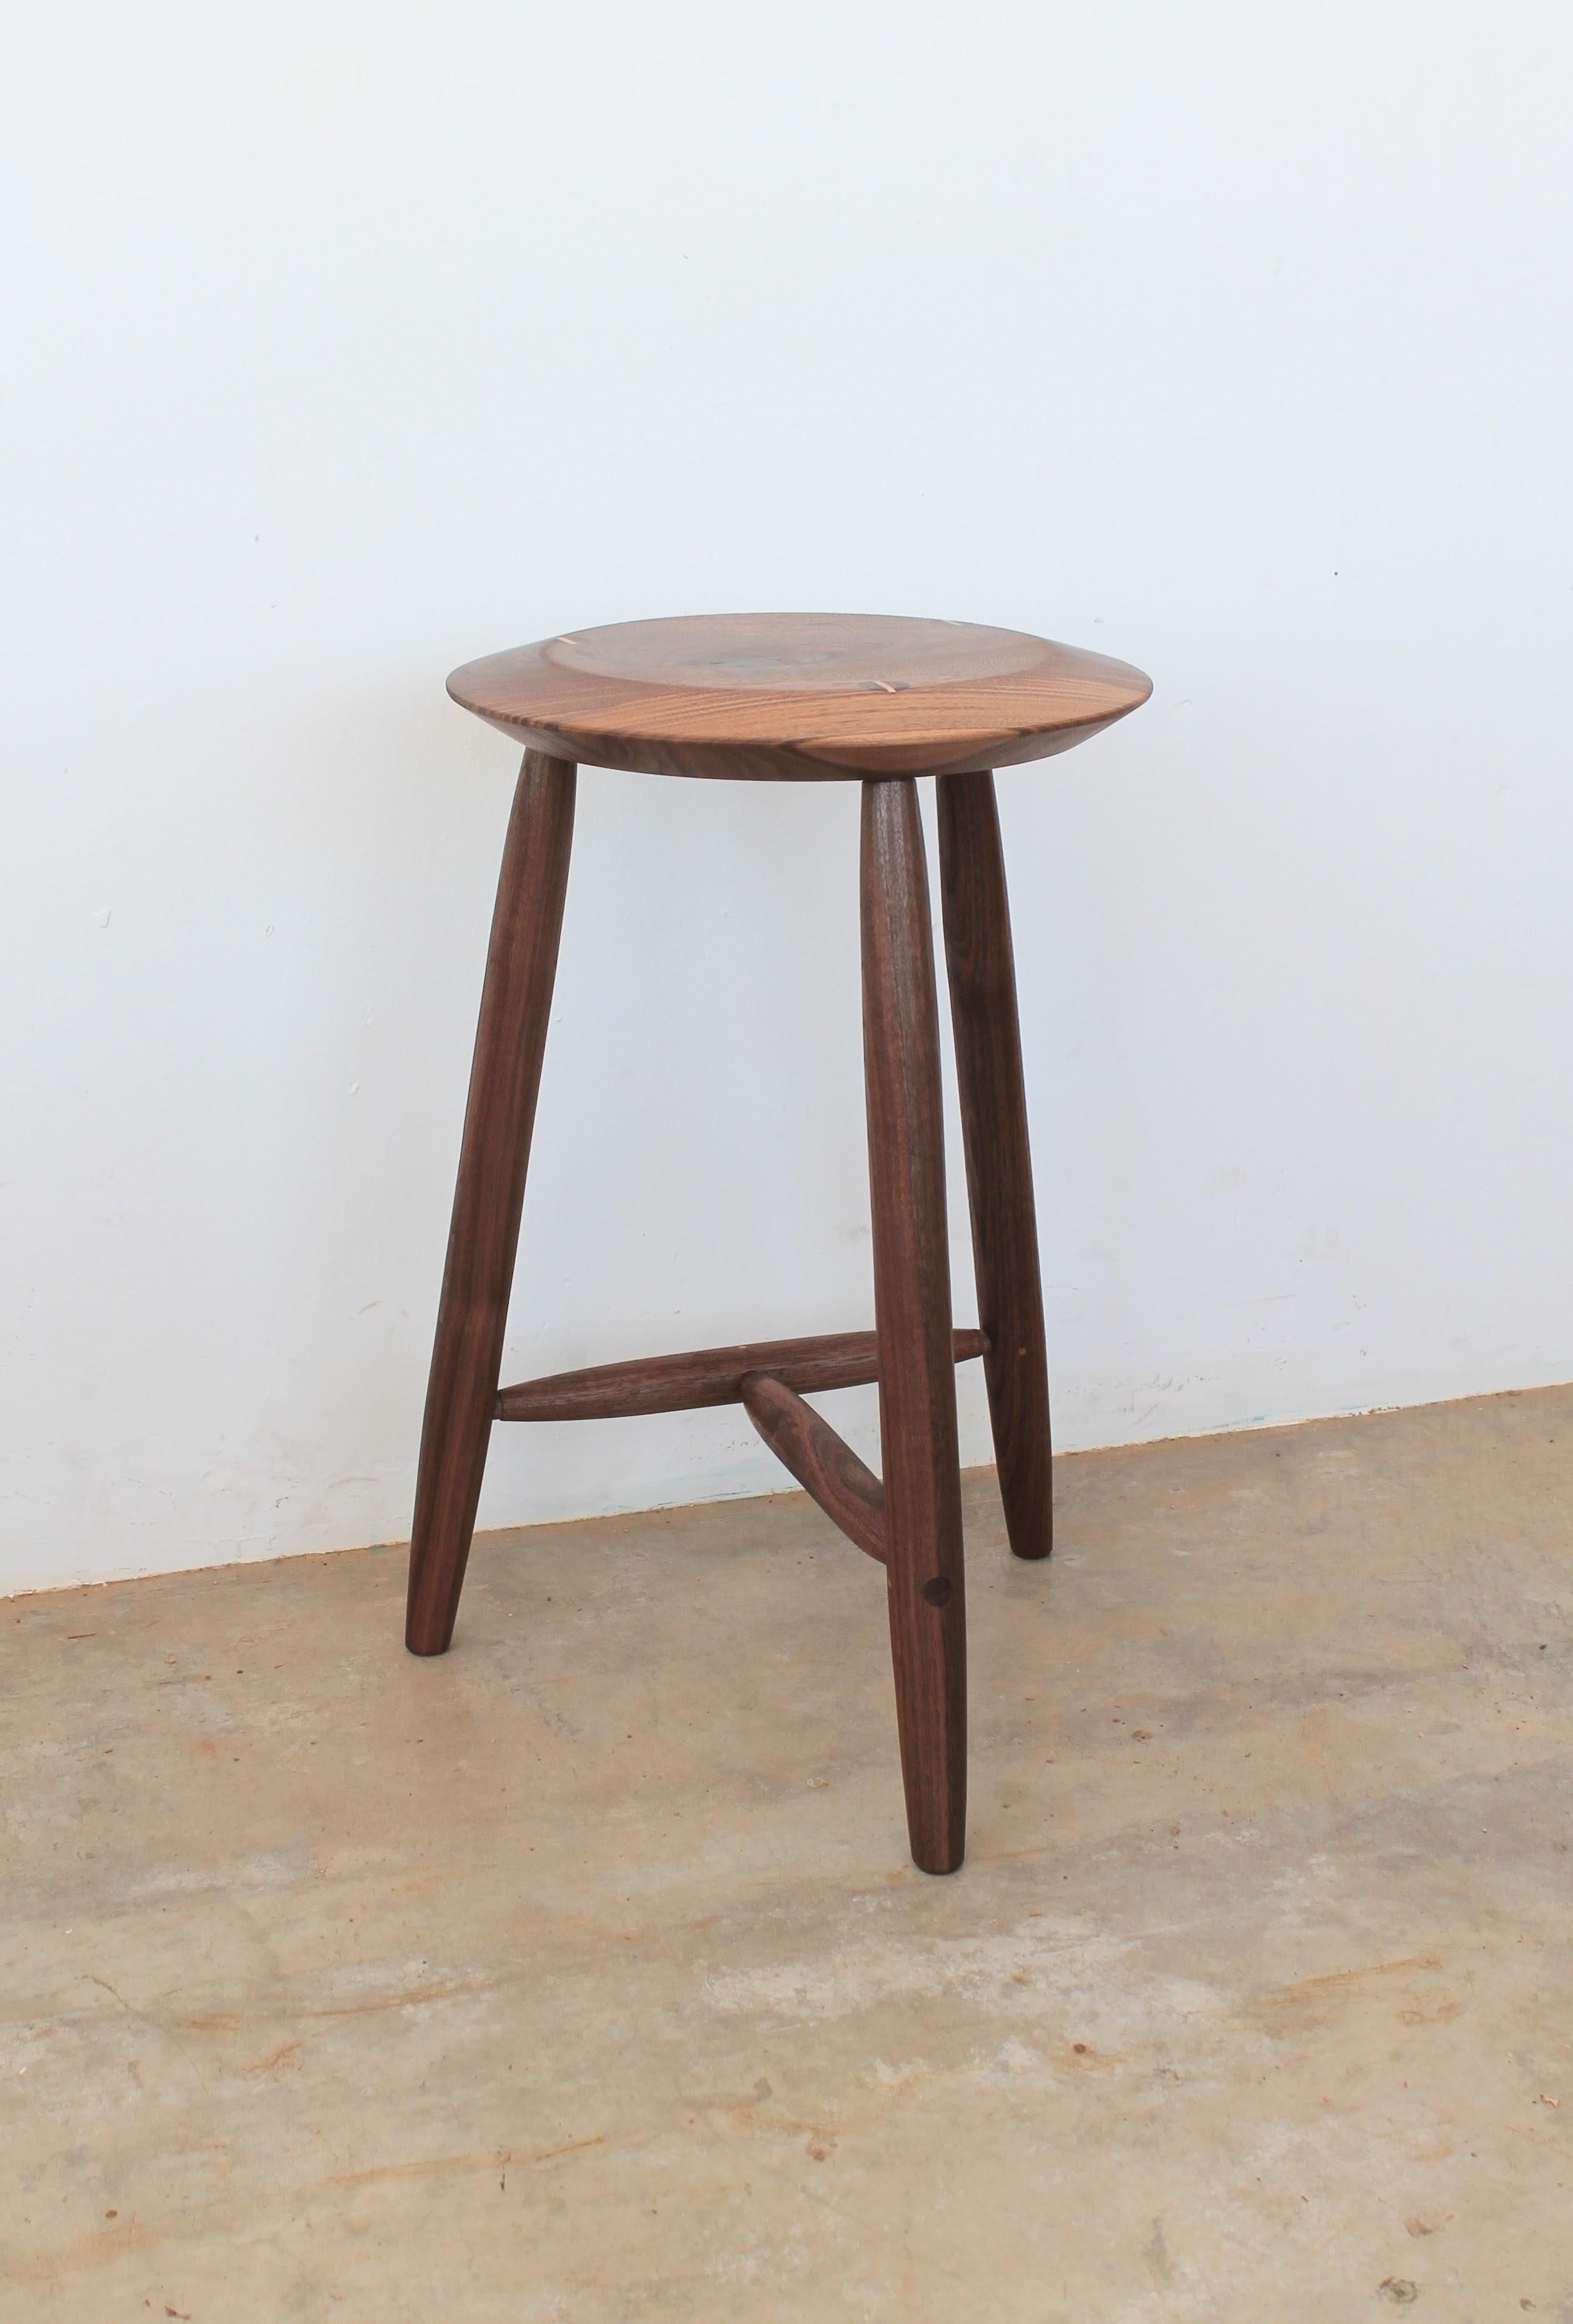 Light and strong, the Beachcomber Counter Stool evokes the sight of an old wooden single hull; it's lean, sturdy mast together with the rigging worthy of the high seas. Constructed of hand shaped legs and stretchers, each piece is carefully fit and